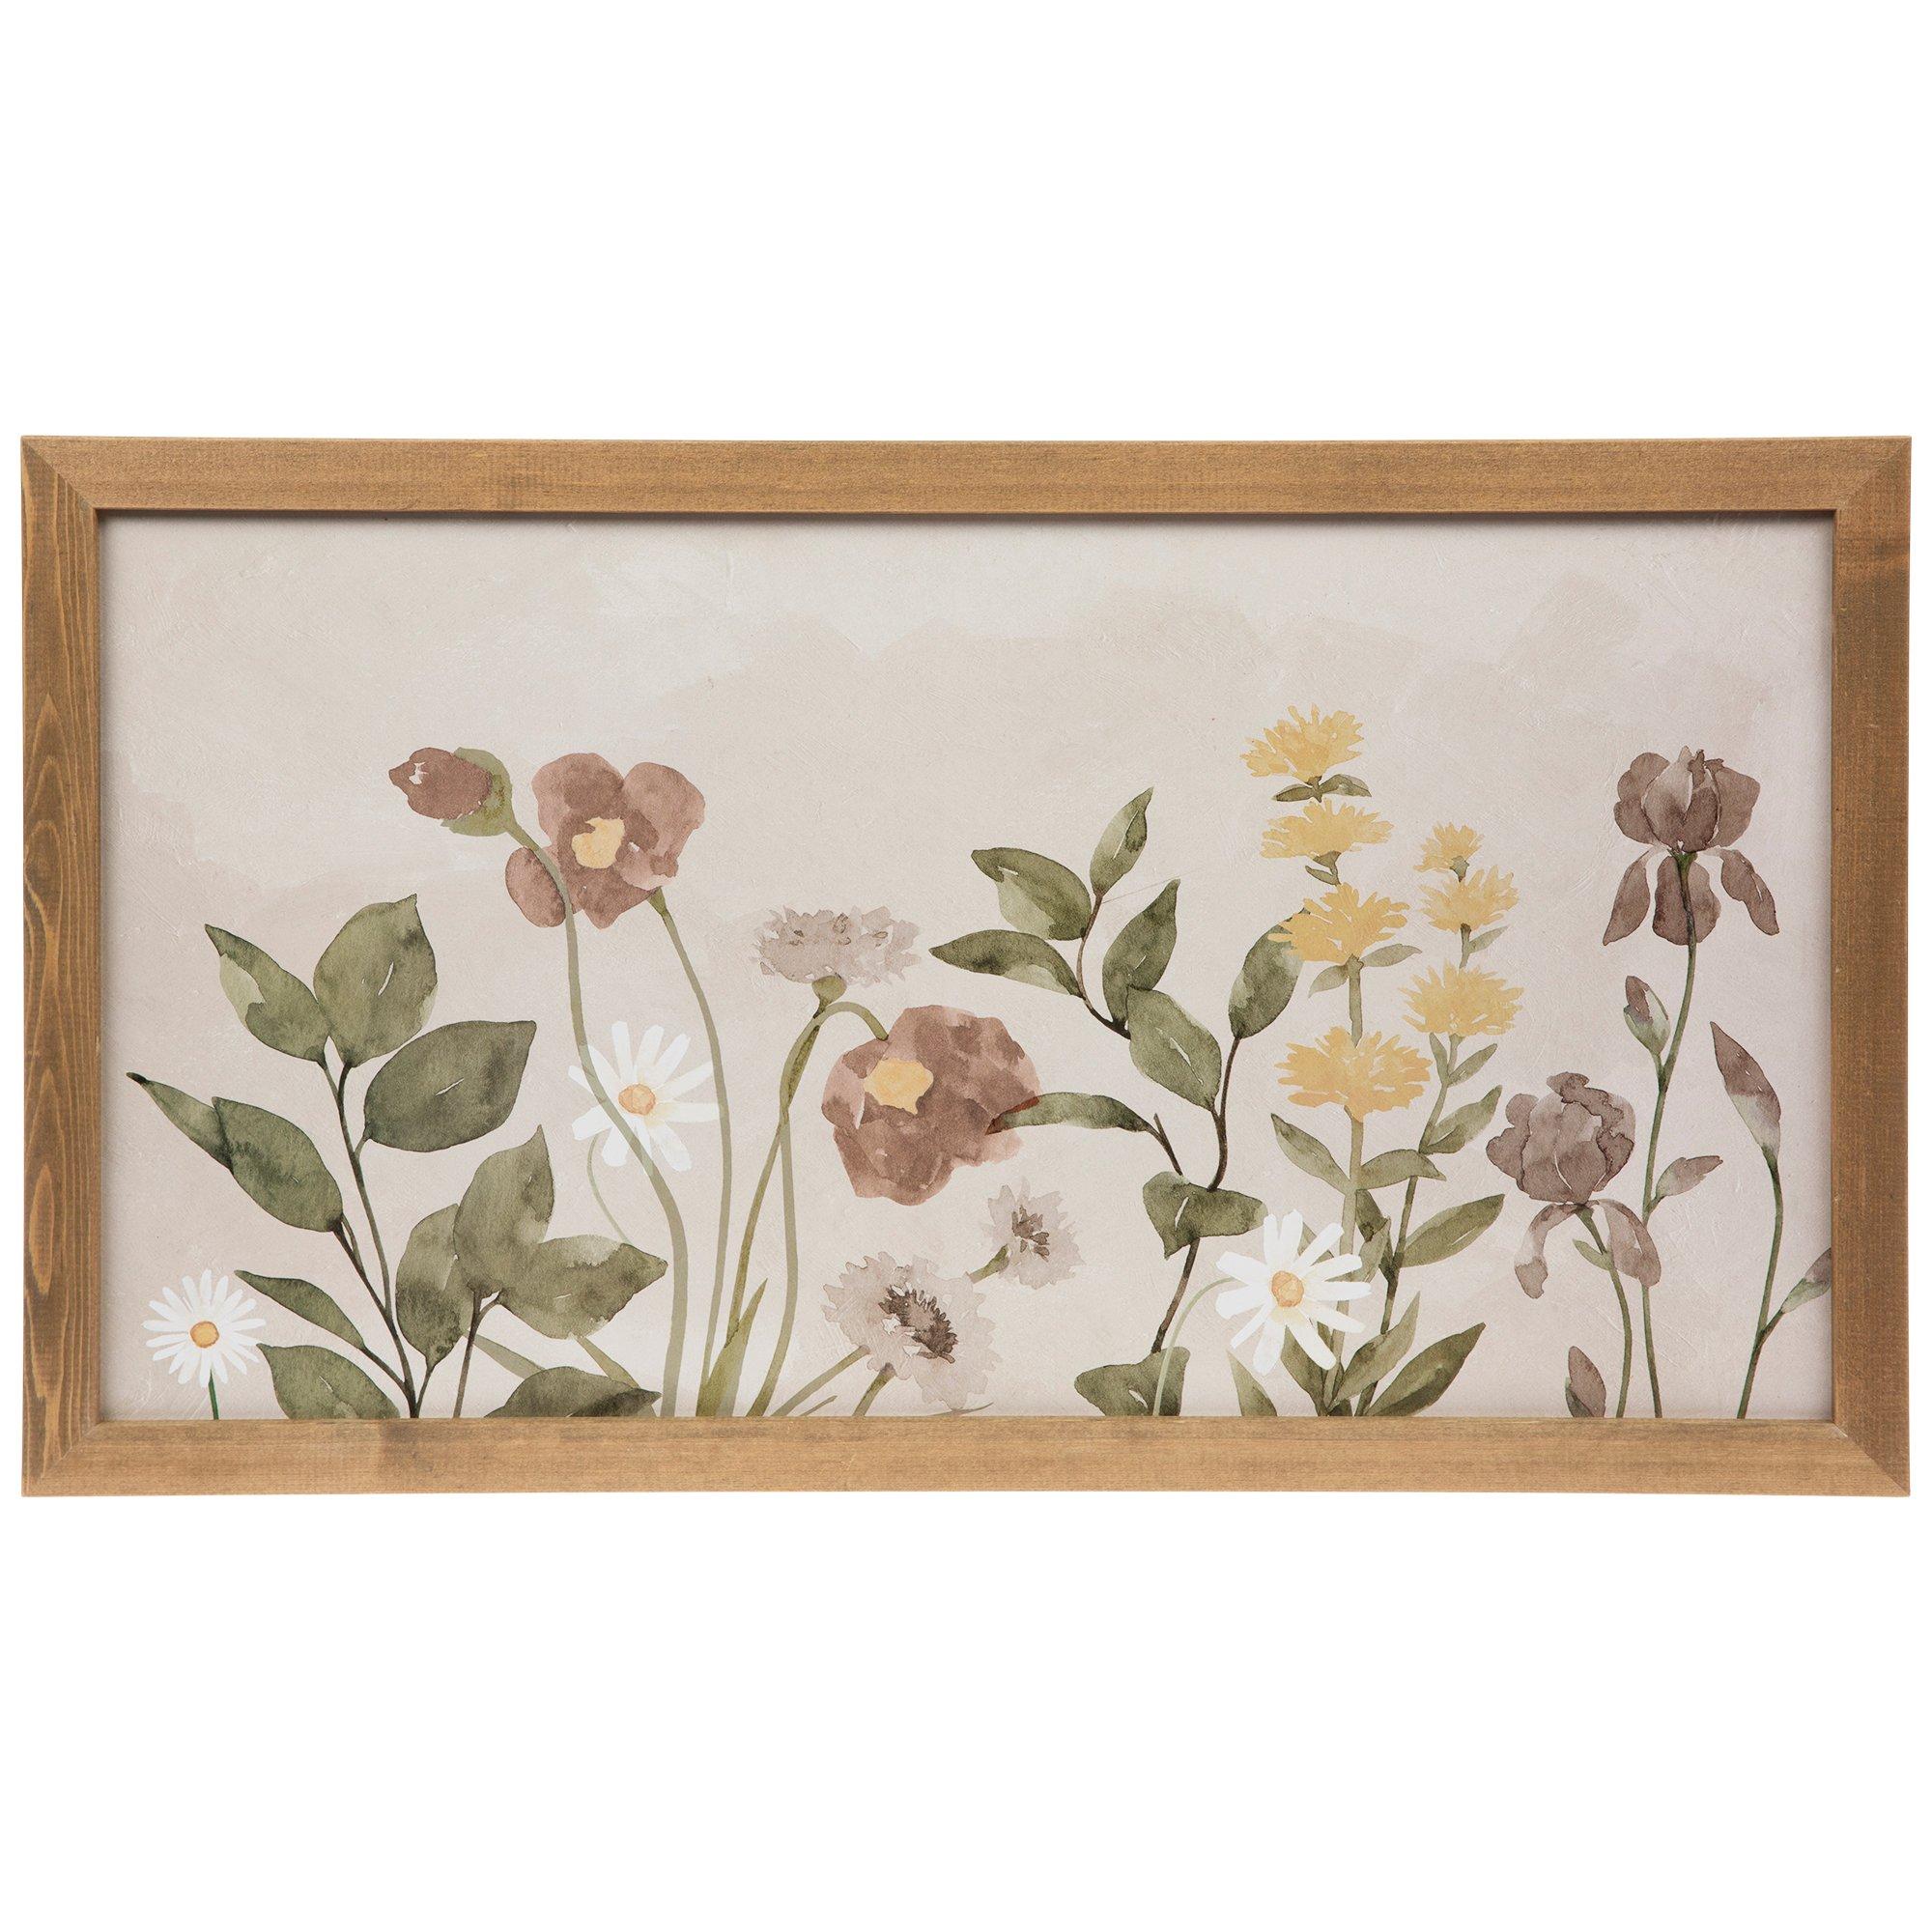 Muted Watercolor Flowers Wood Wall Decor, Hobby Lobby